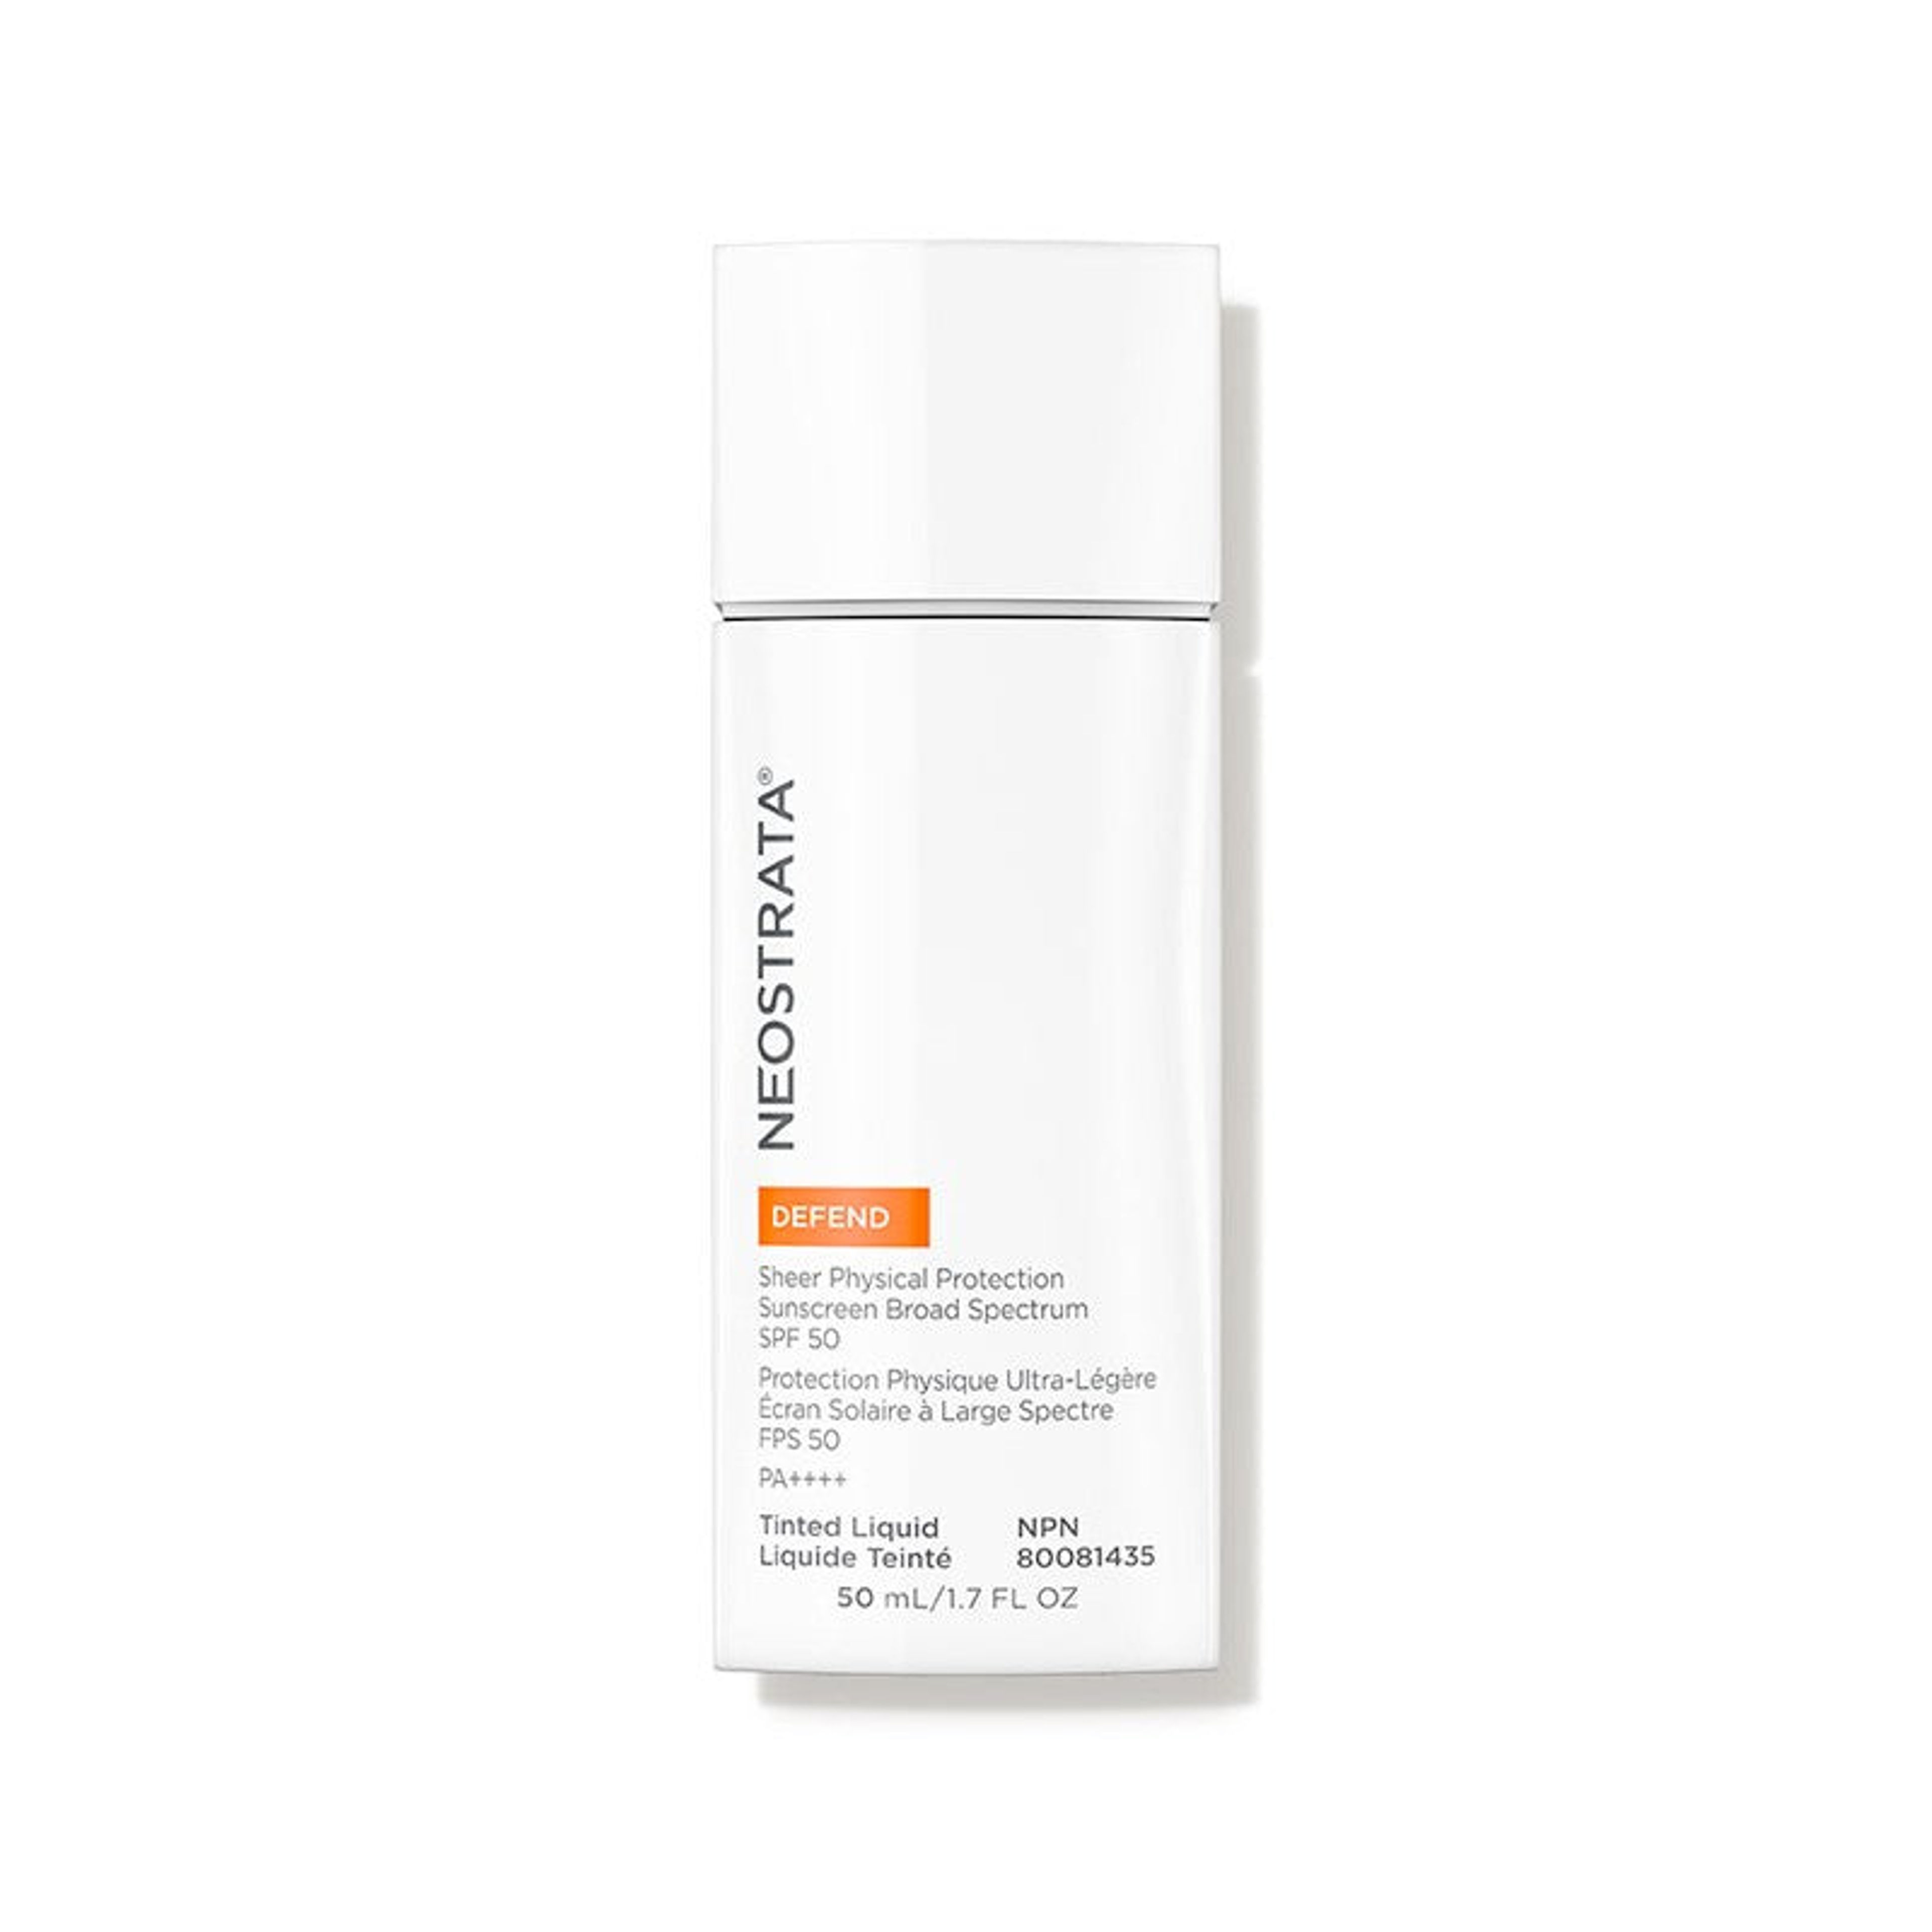 Sheer Physical Protection SPF50